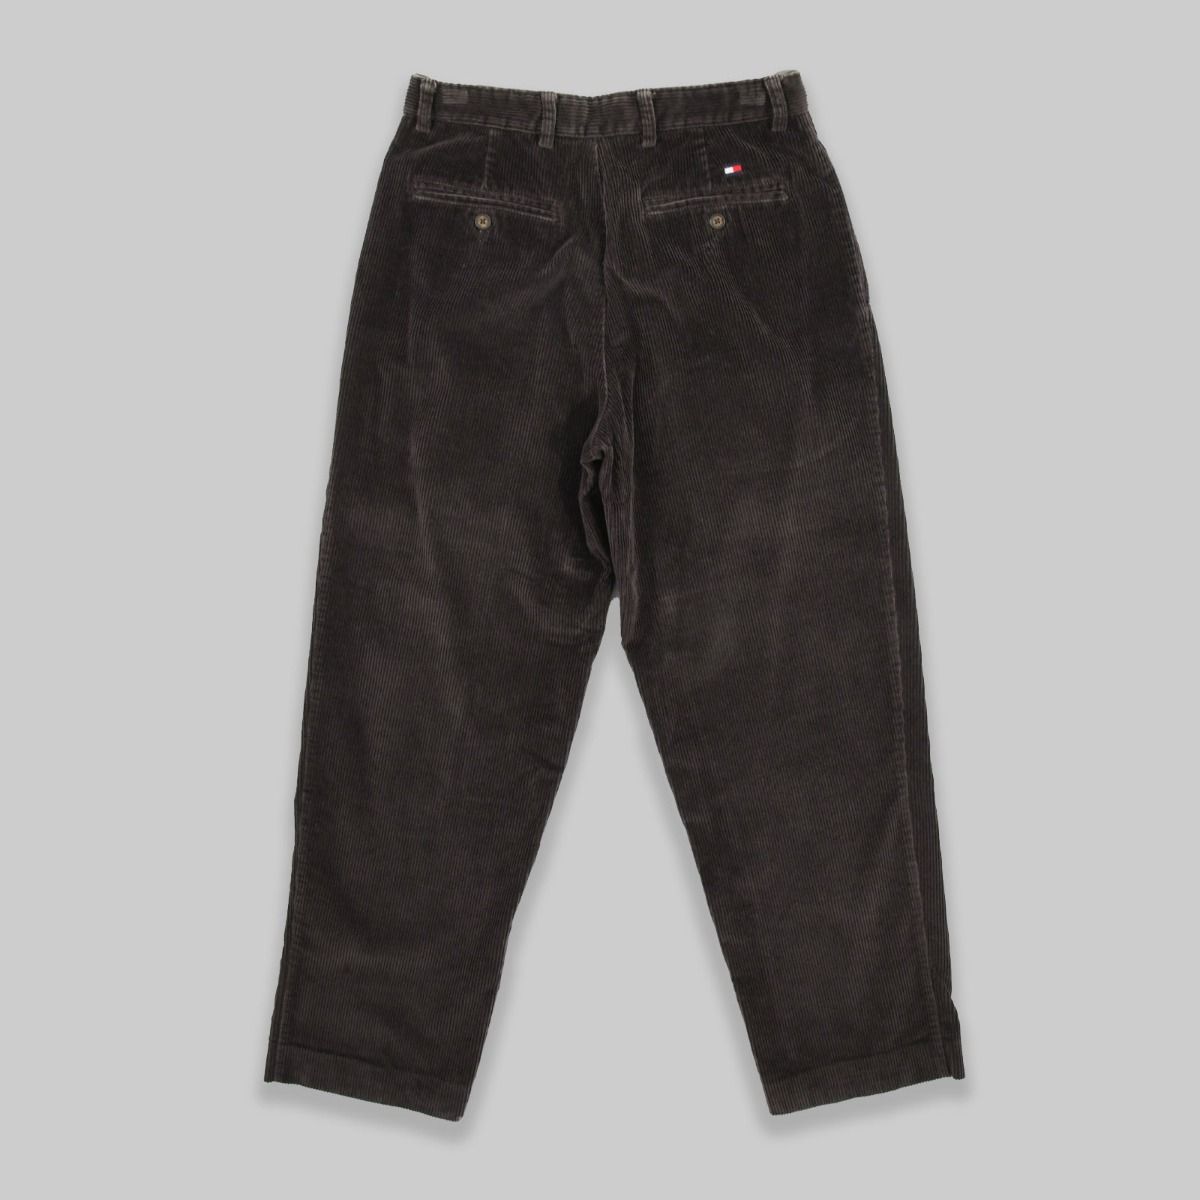 Tommy Hilfiger Rich Brown Corduroy Trousers